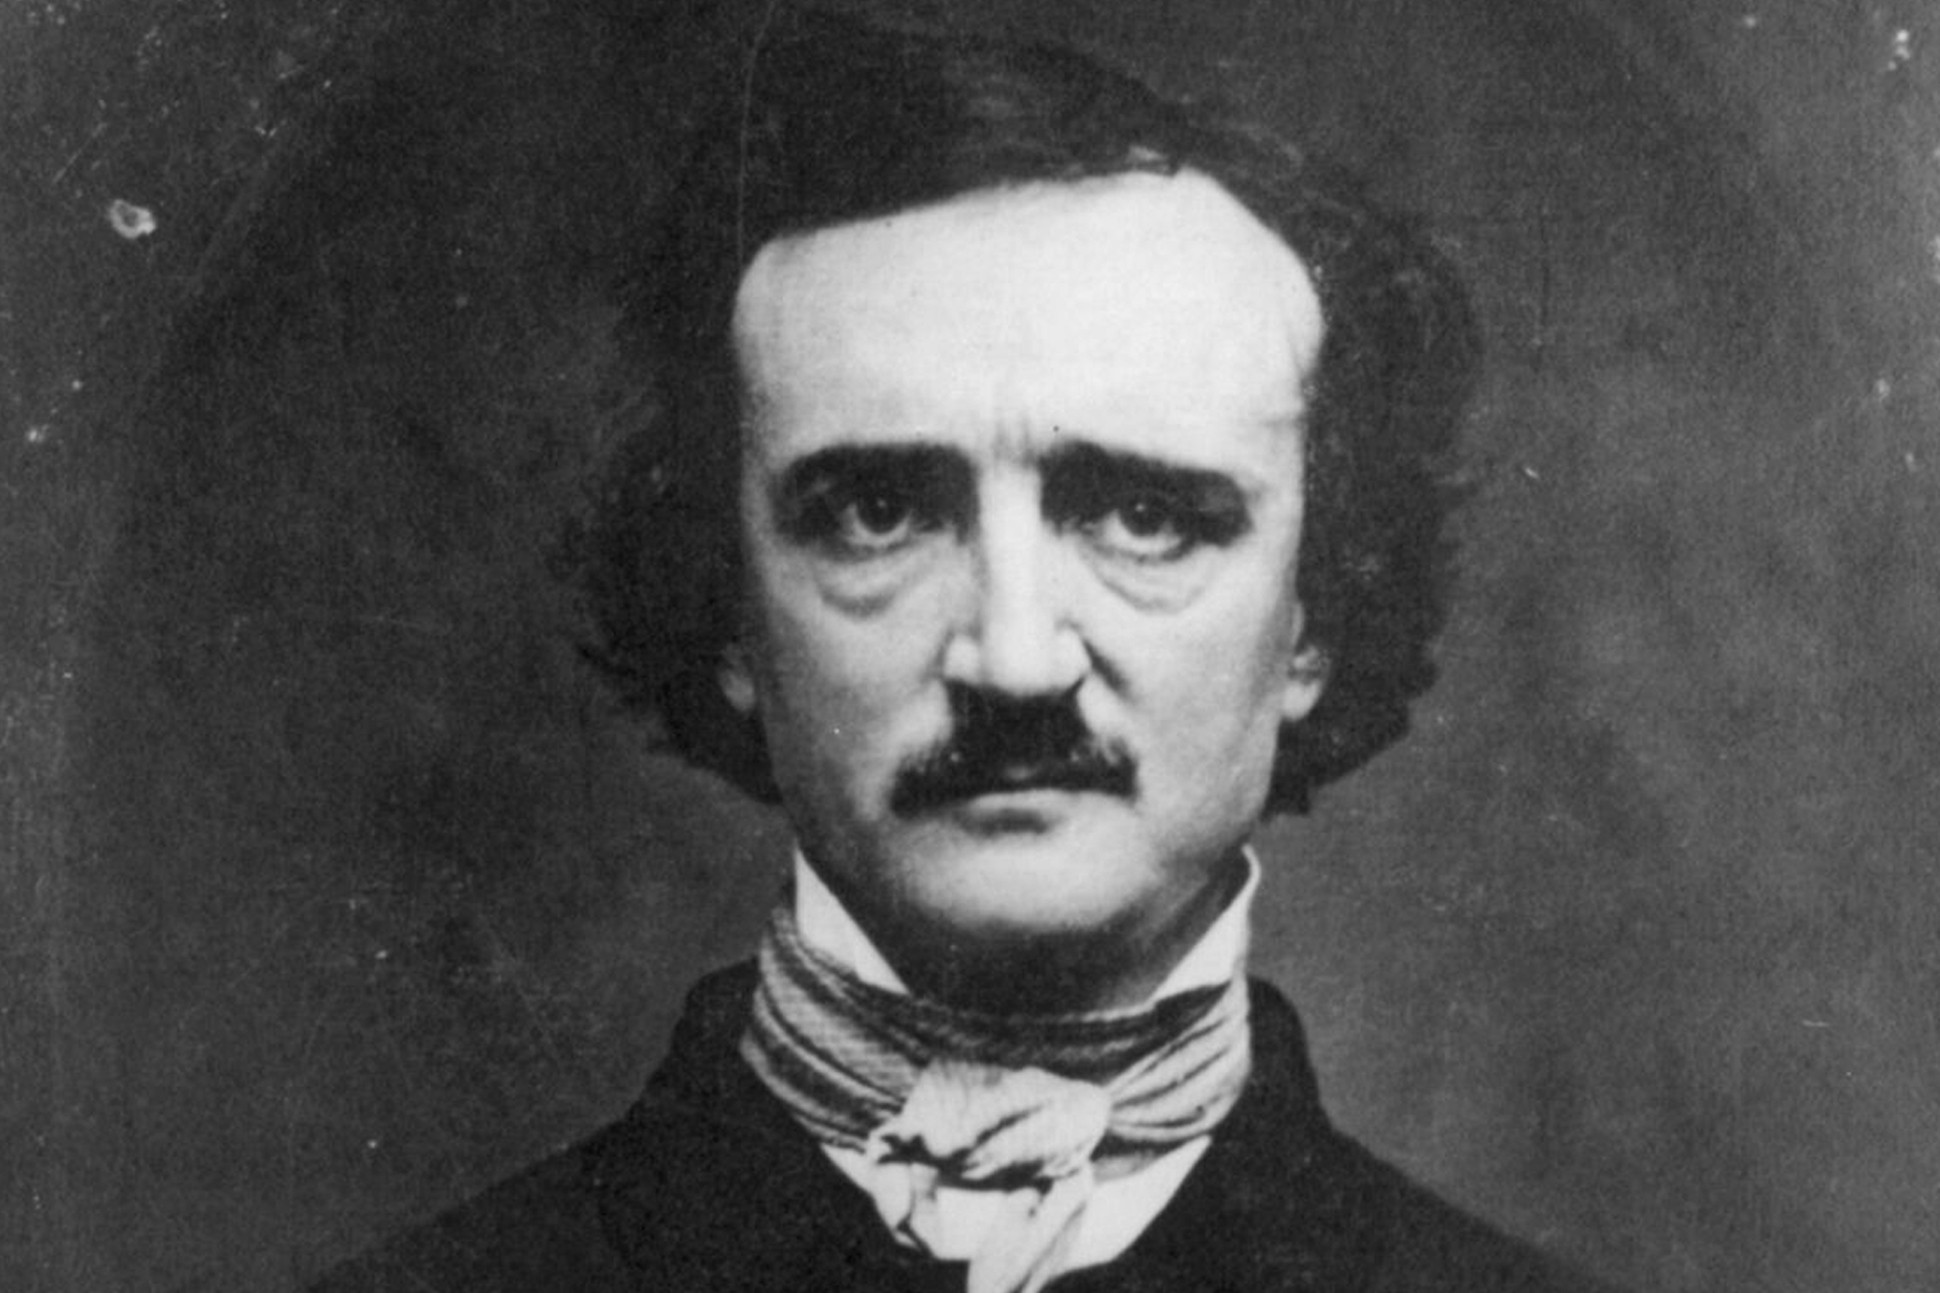 according to poe there is a radical error in the